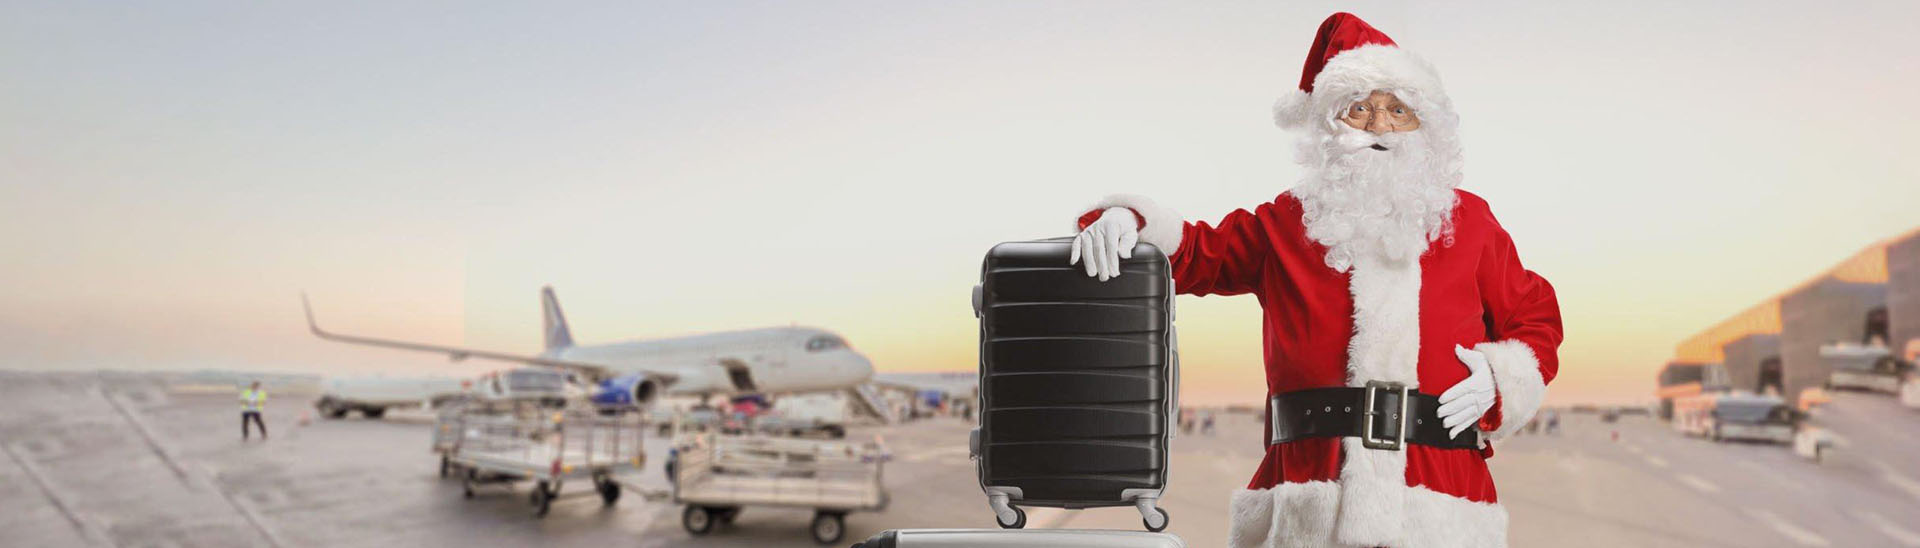 How To Get Cheaper Flight Deals For Christmas Holidays